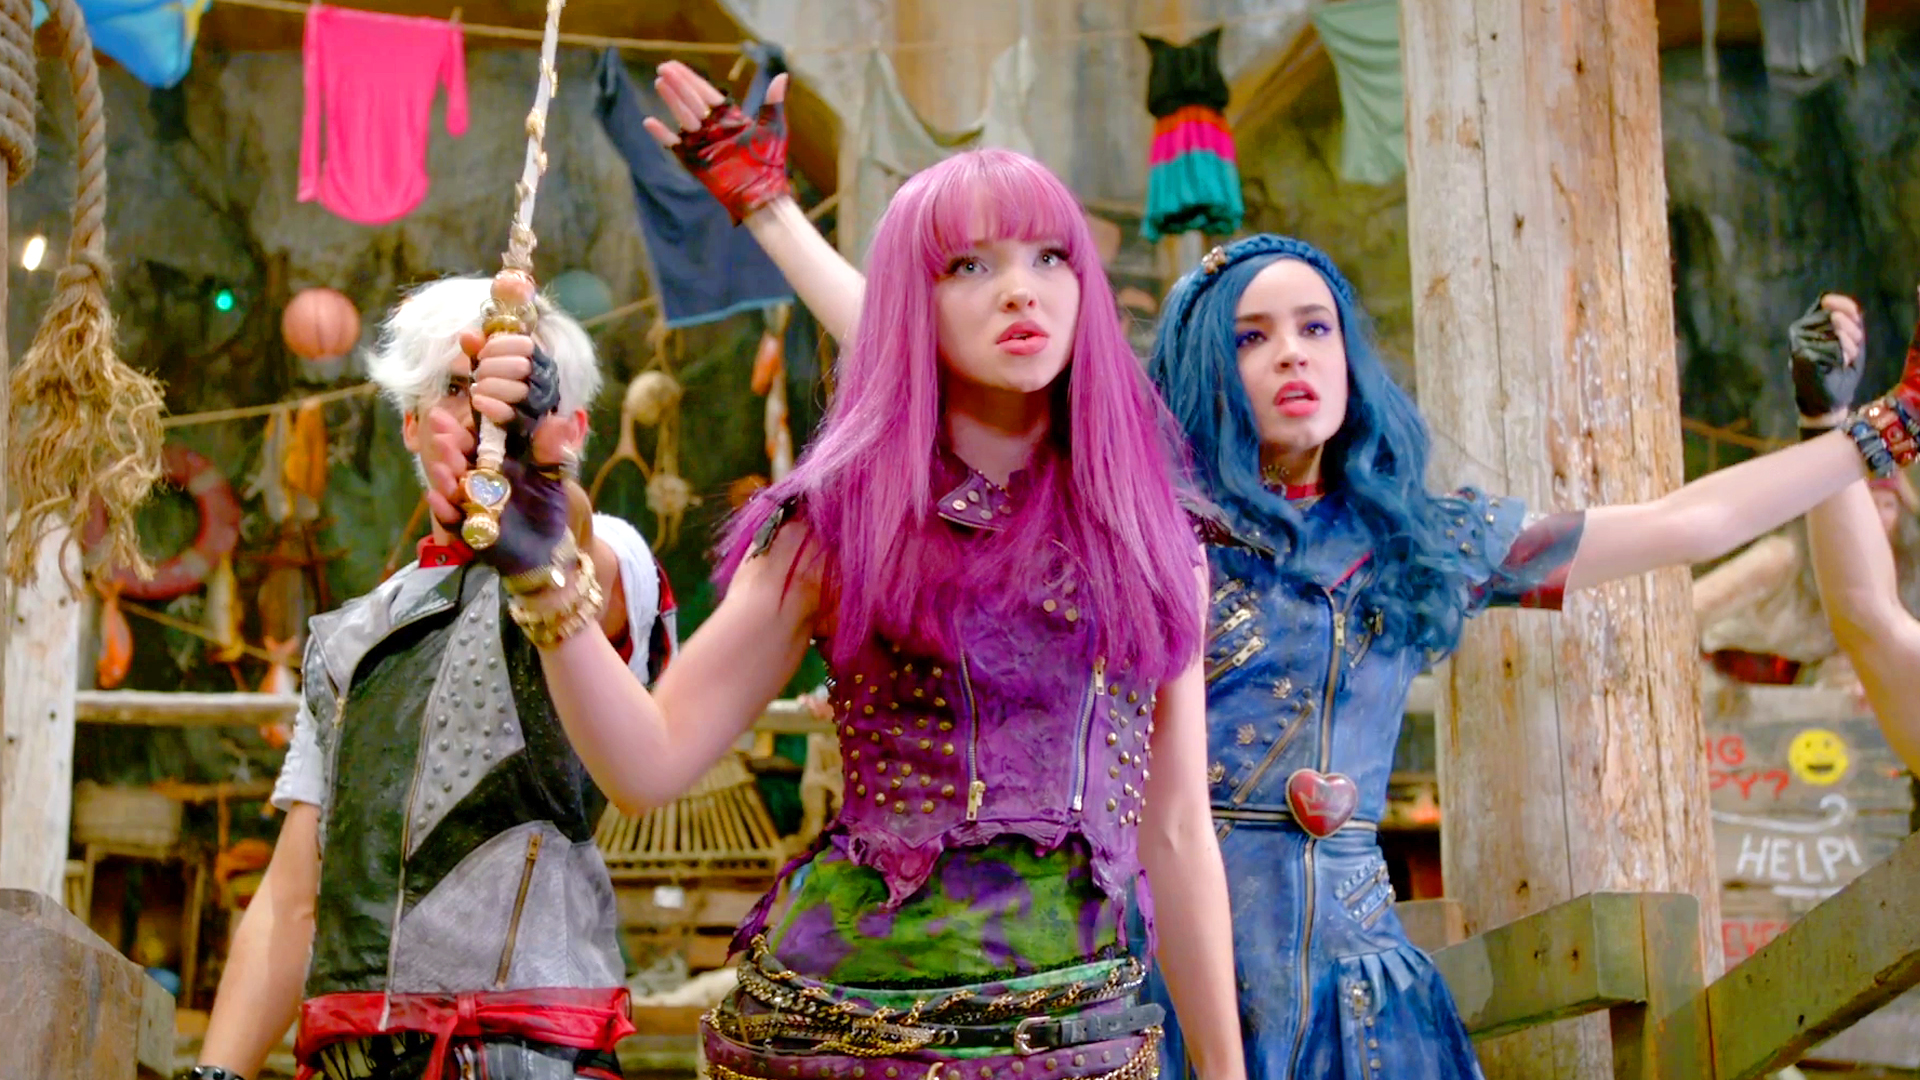 Review: In Disney's 'Descendants 2,' the Kids Are on Their Own